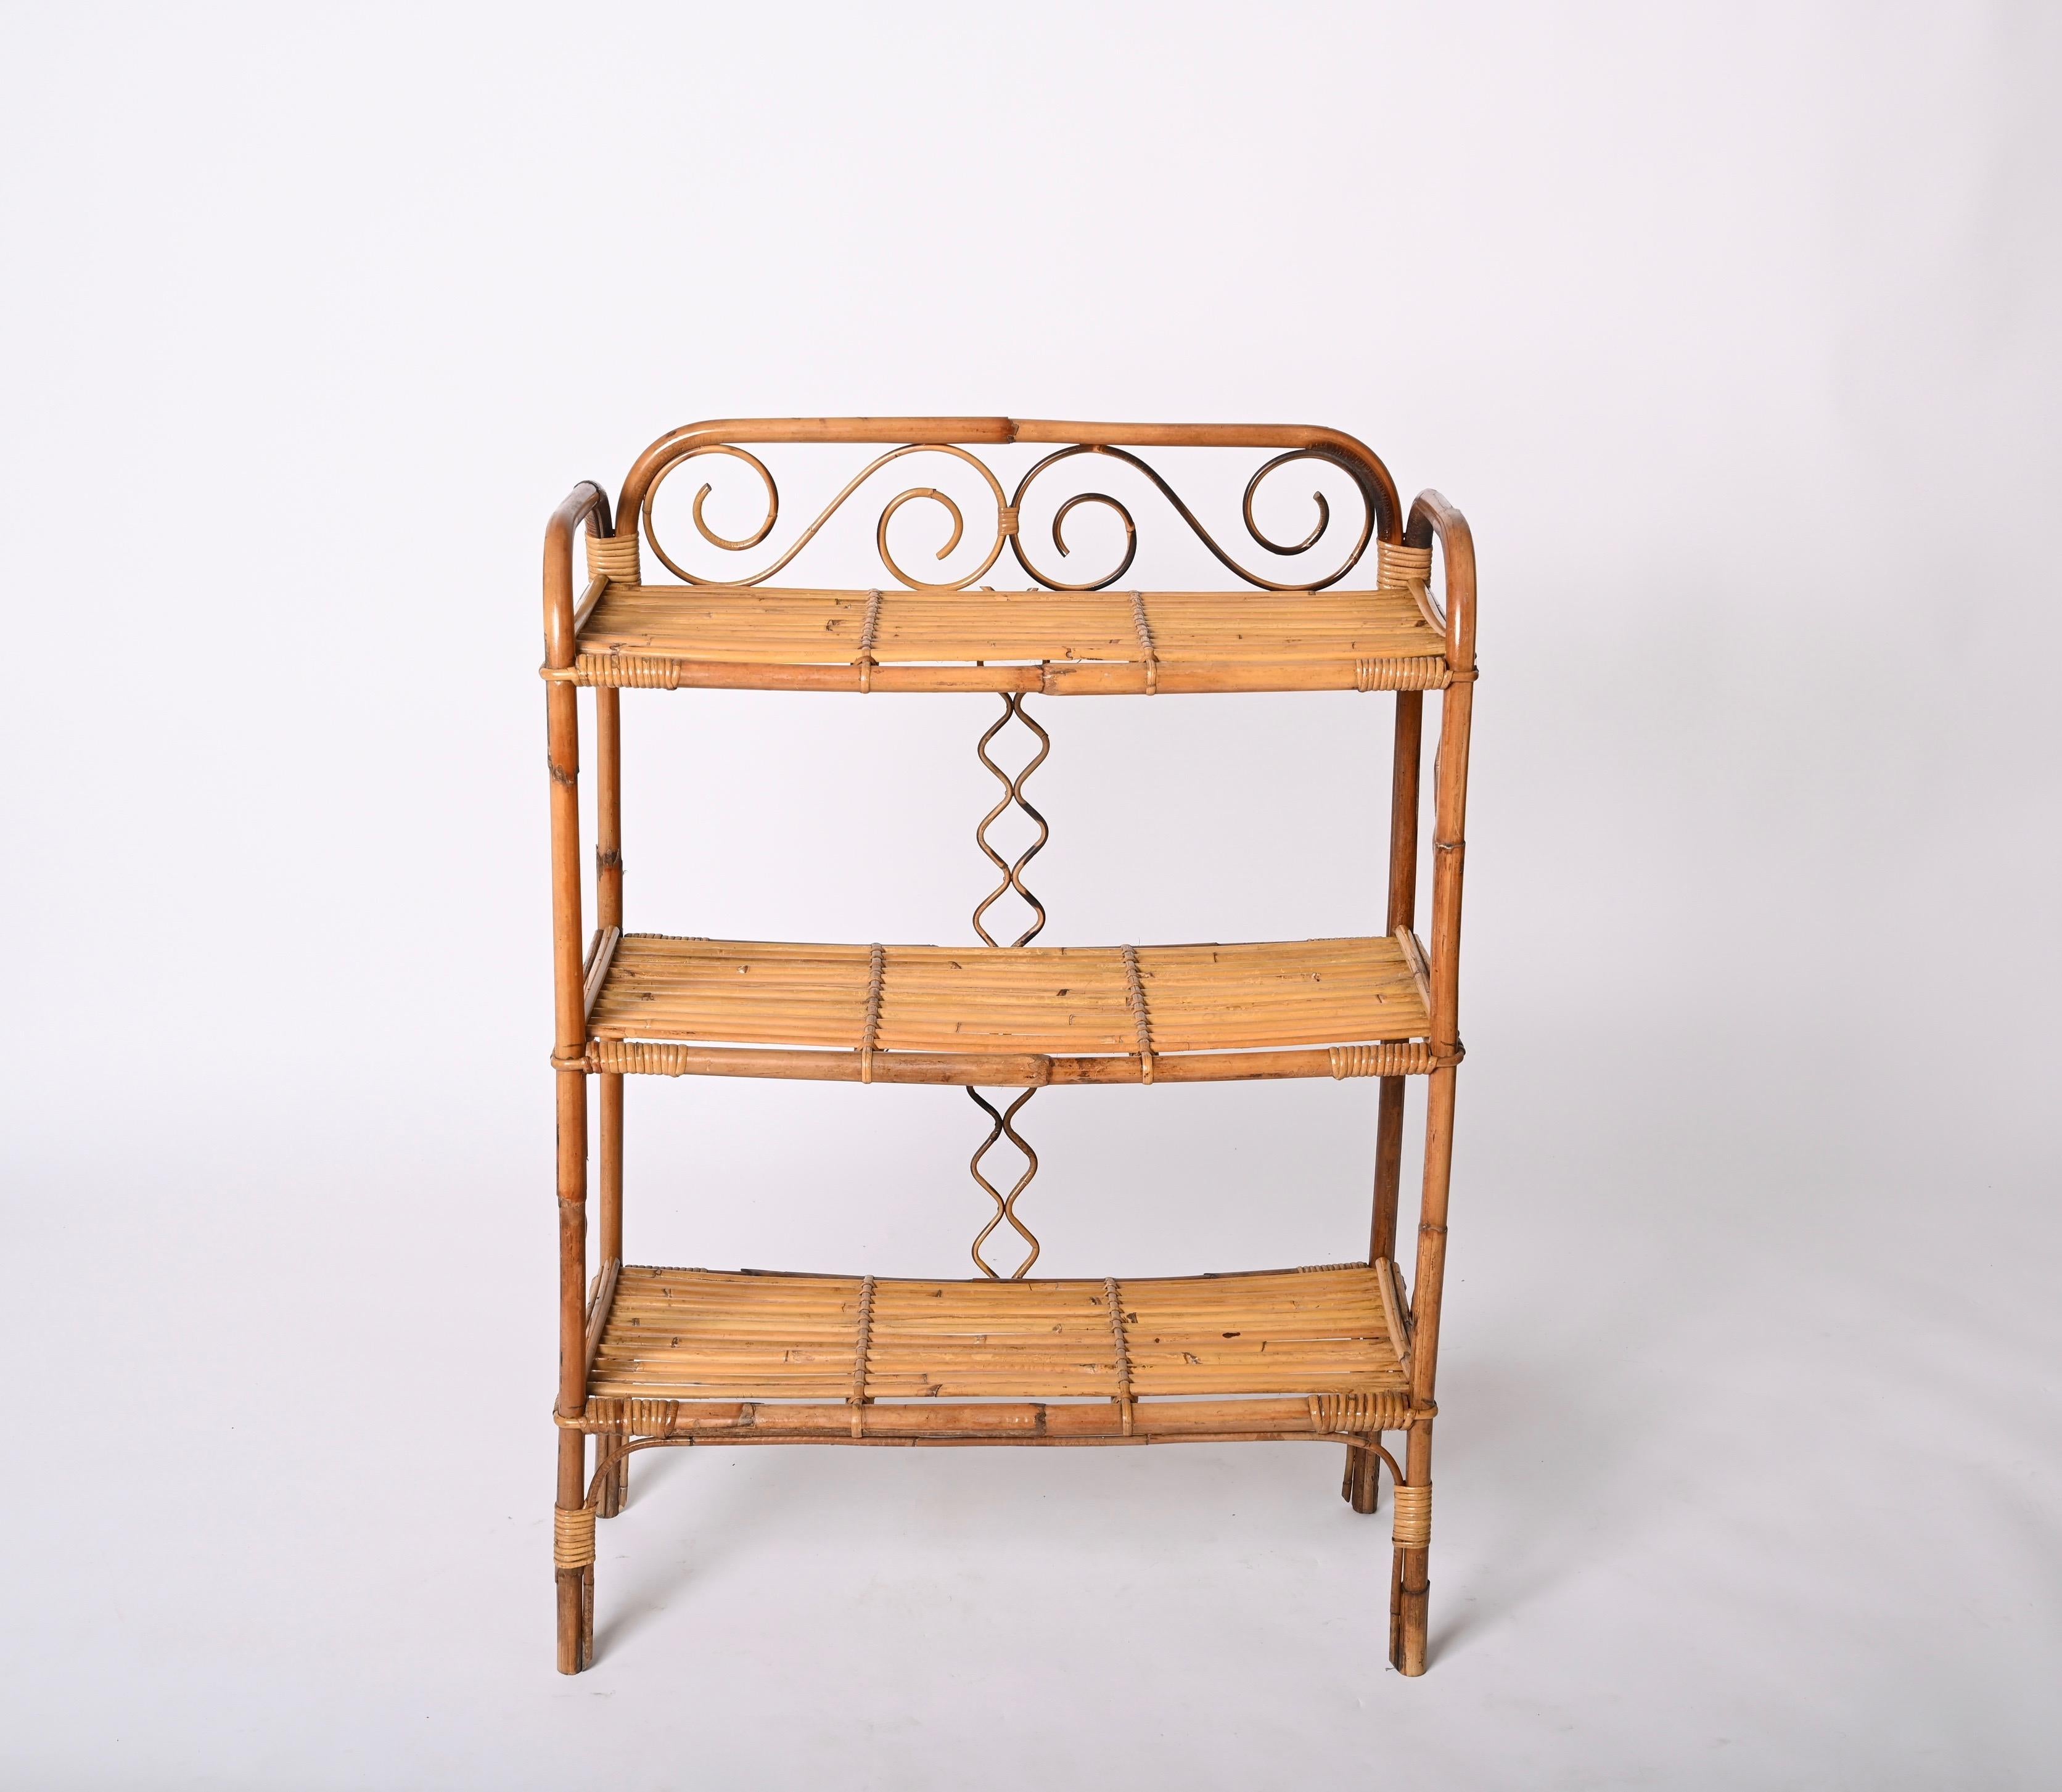 Midcentury Étagère Bamboo and Rattan, Italian Bookcase with Three Shelves, 1970s For Sale 11